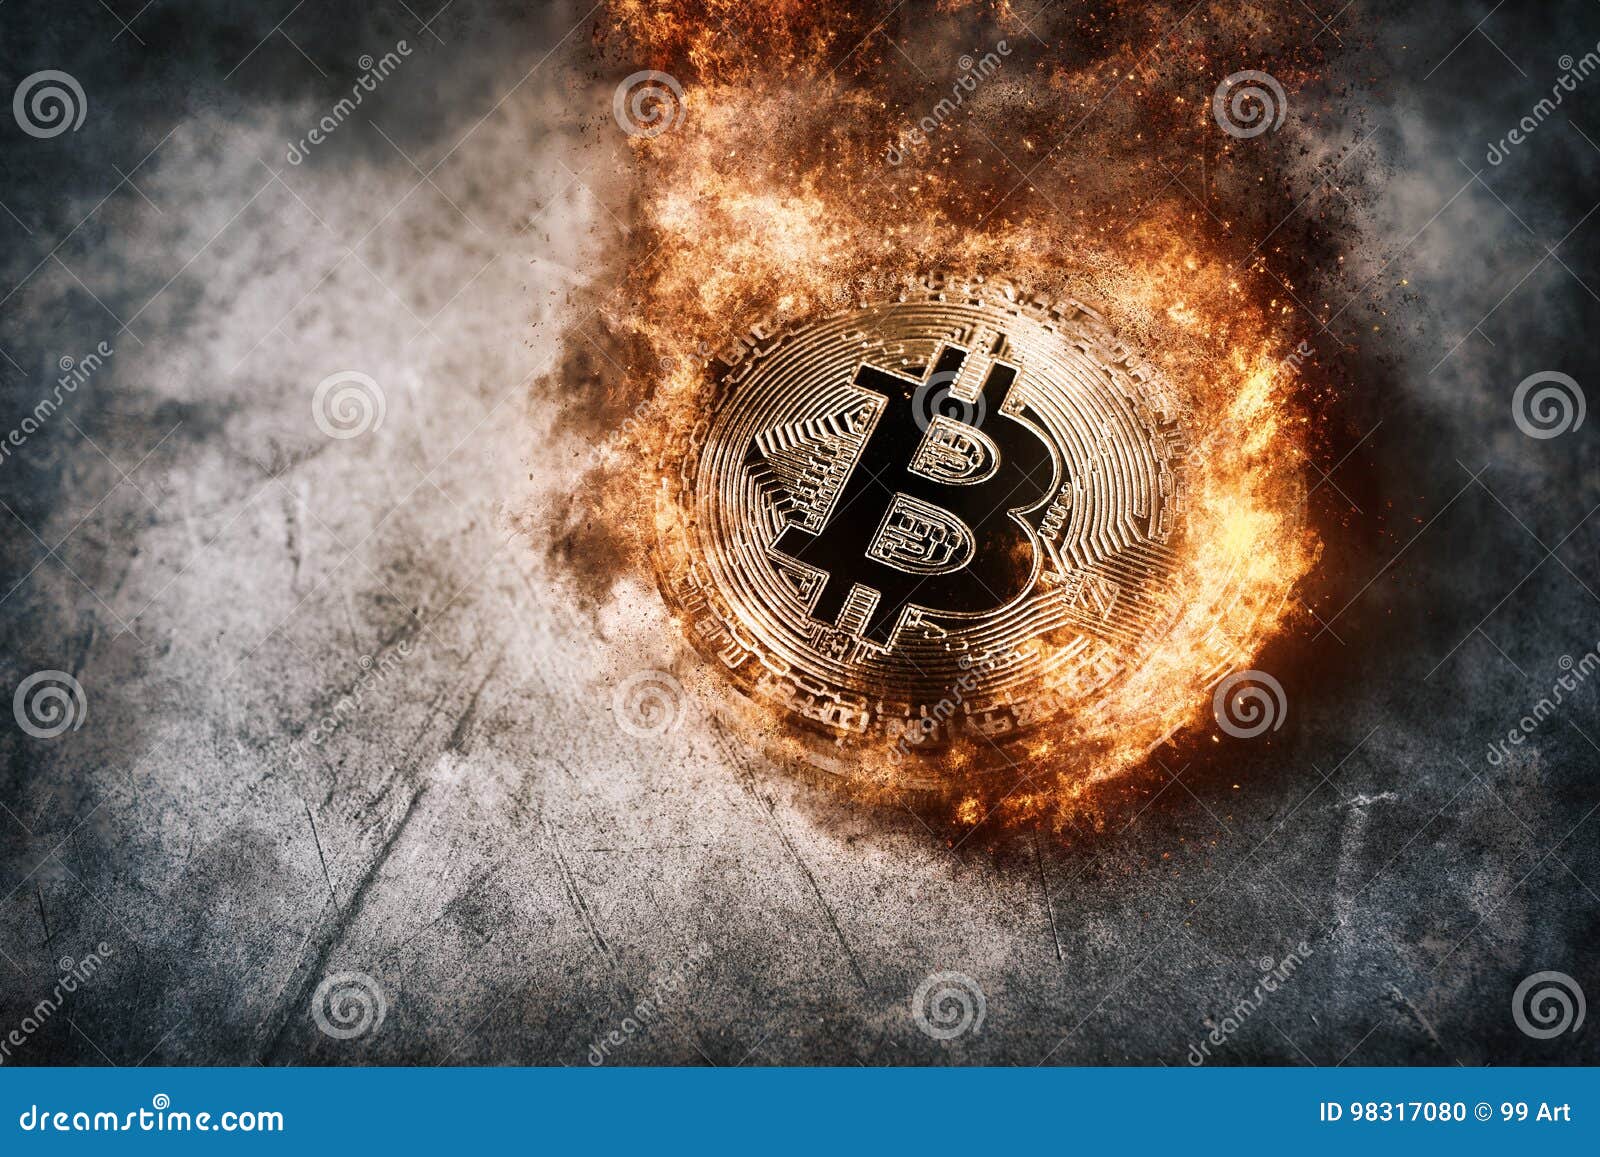 burning golden bitcoin coin crypto currency background concept.